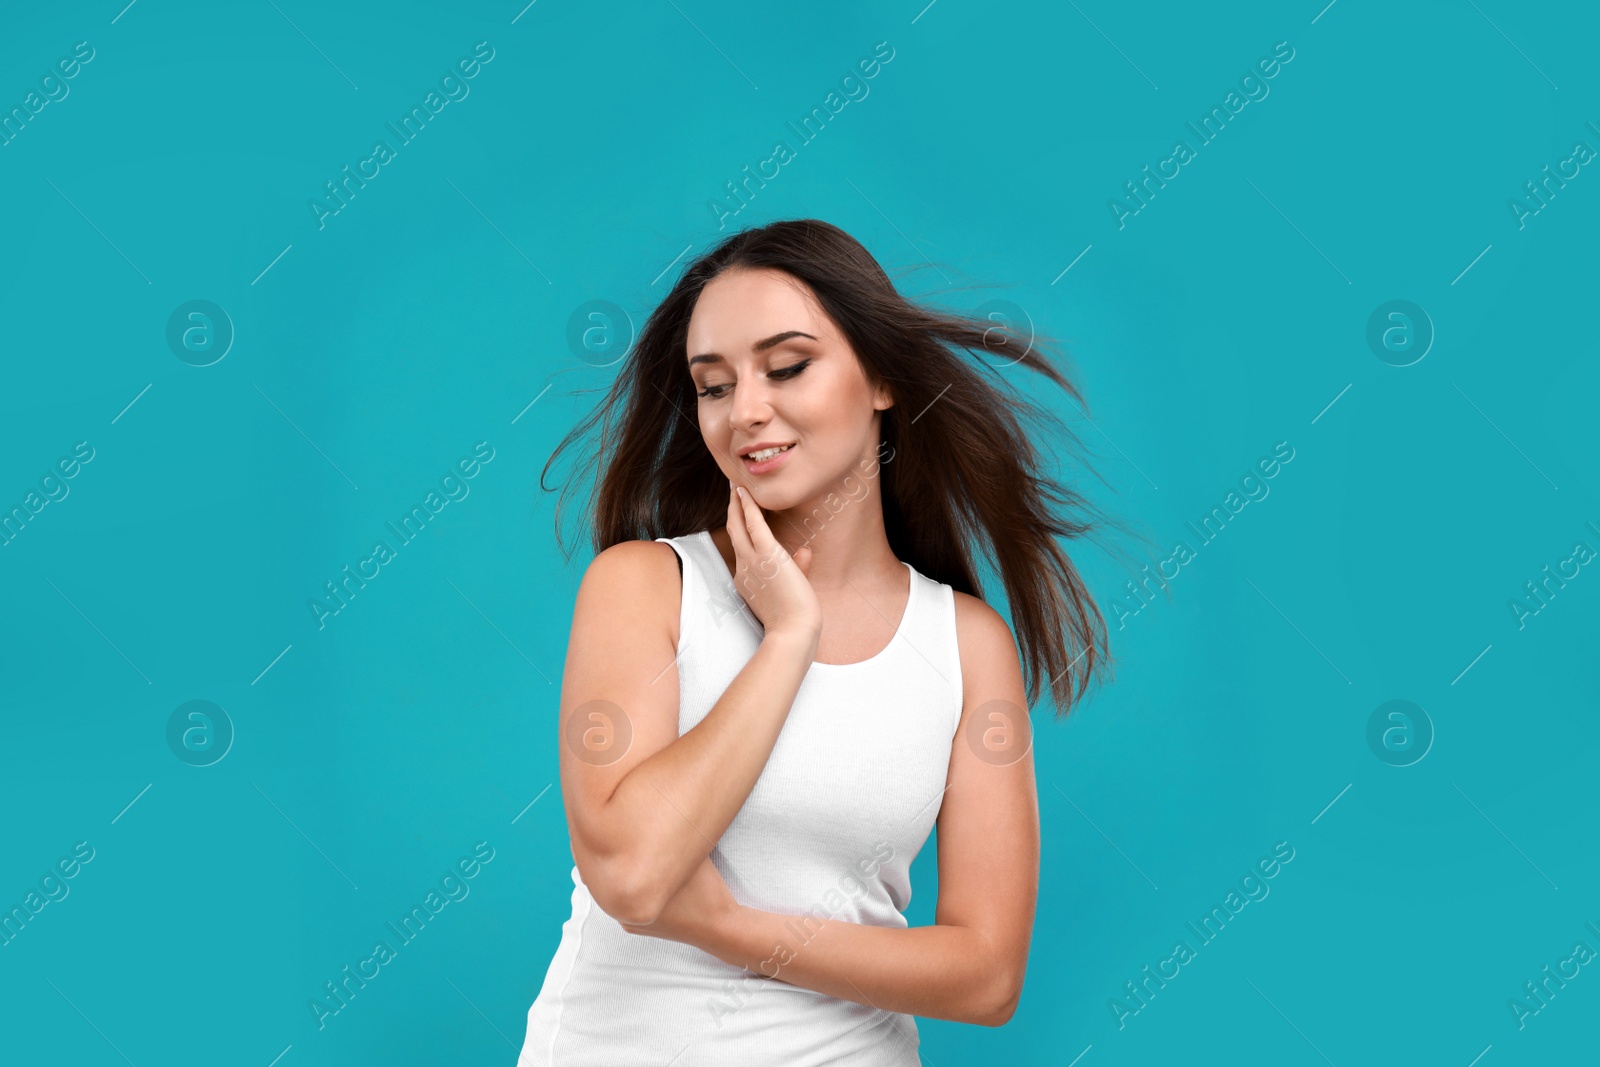 Photo of Beautiful young woman in casual outfit on turquoise background